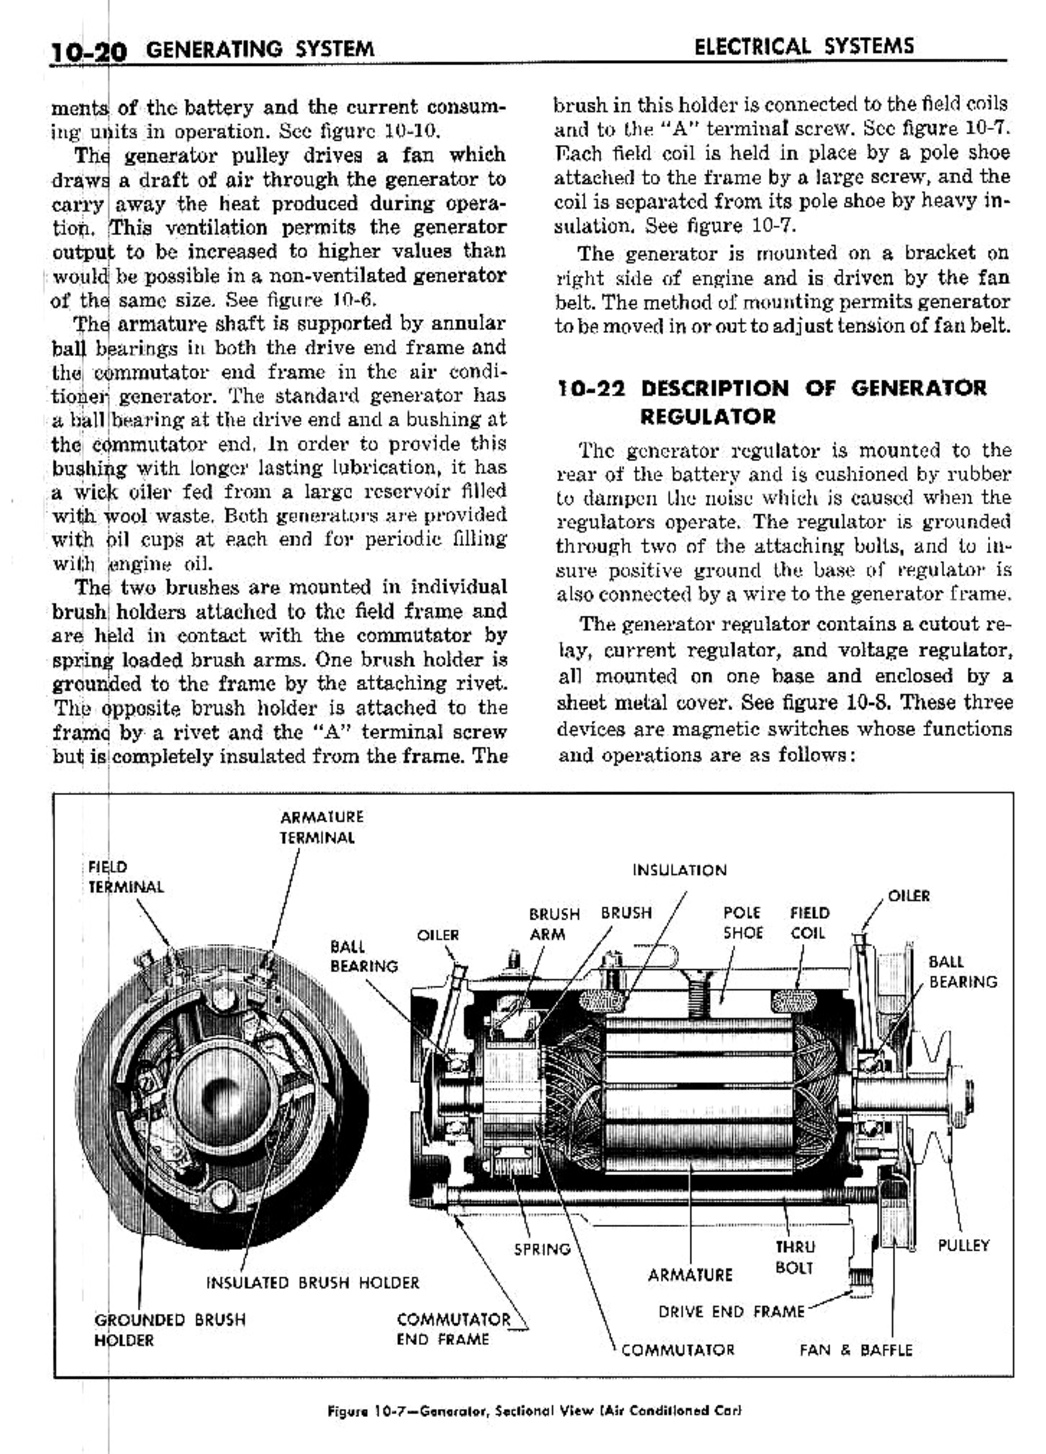 n_11 1959 Buick Shop Manual - Electrical Systems-020-020.jpg